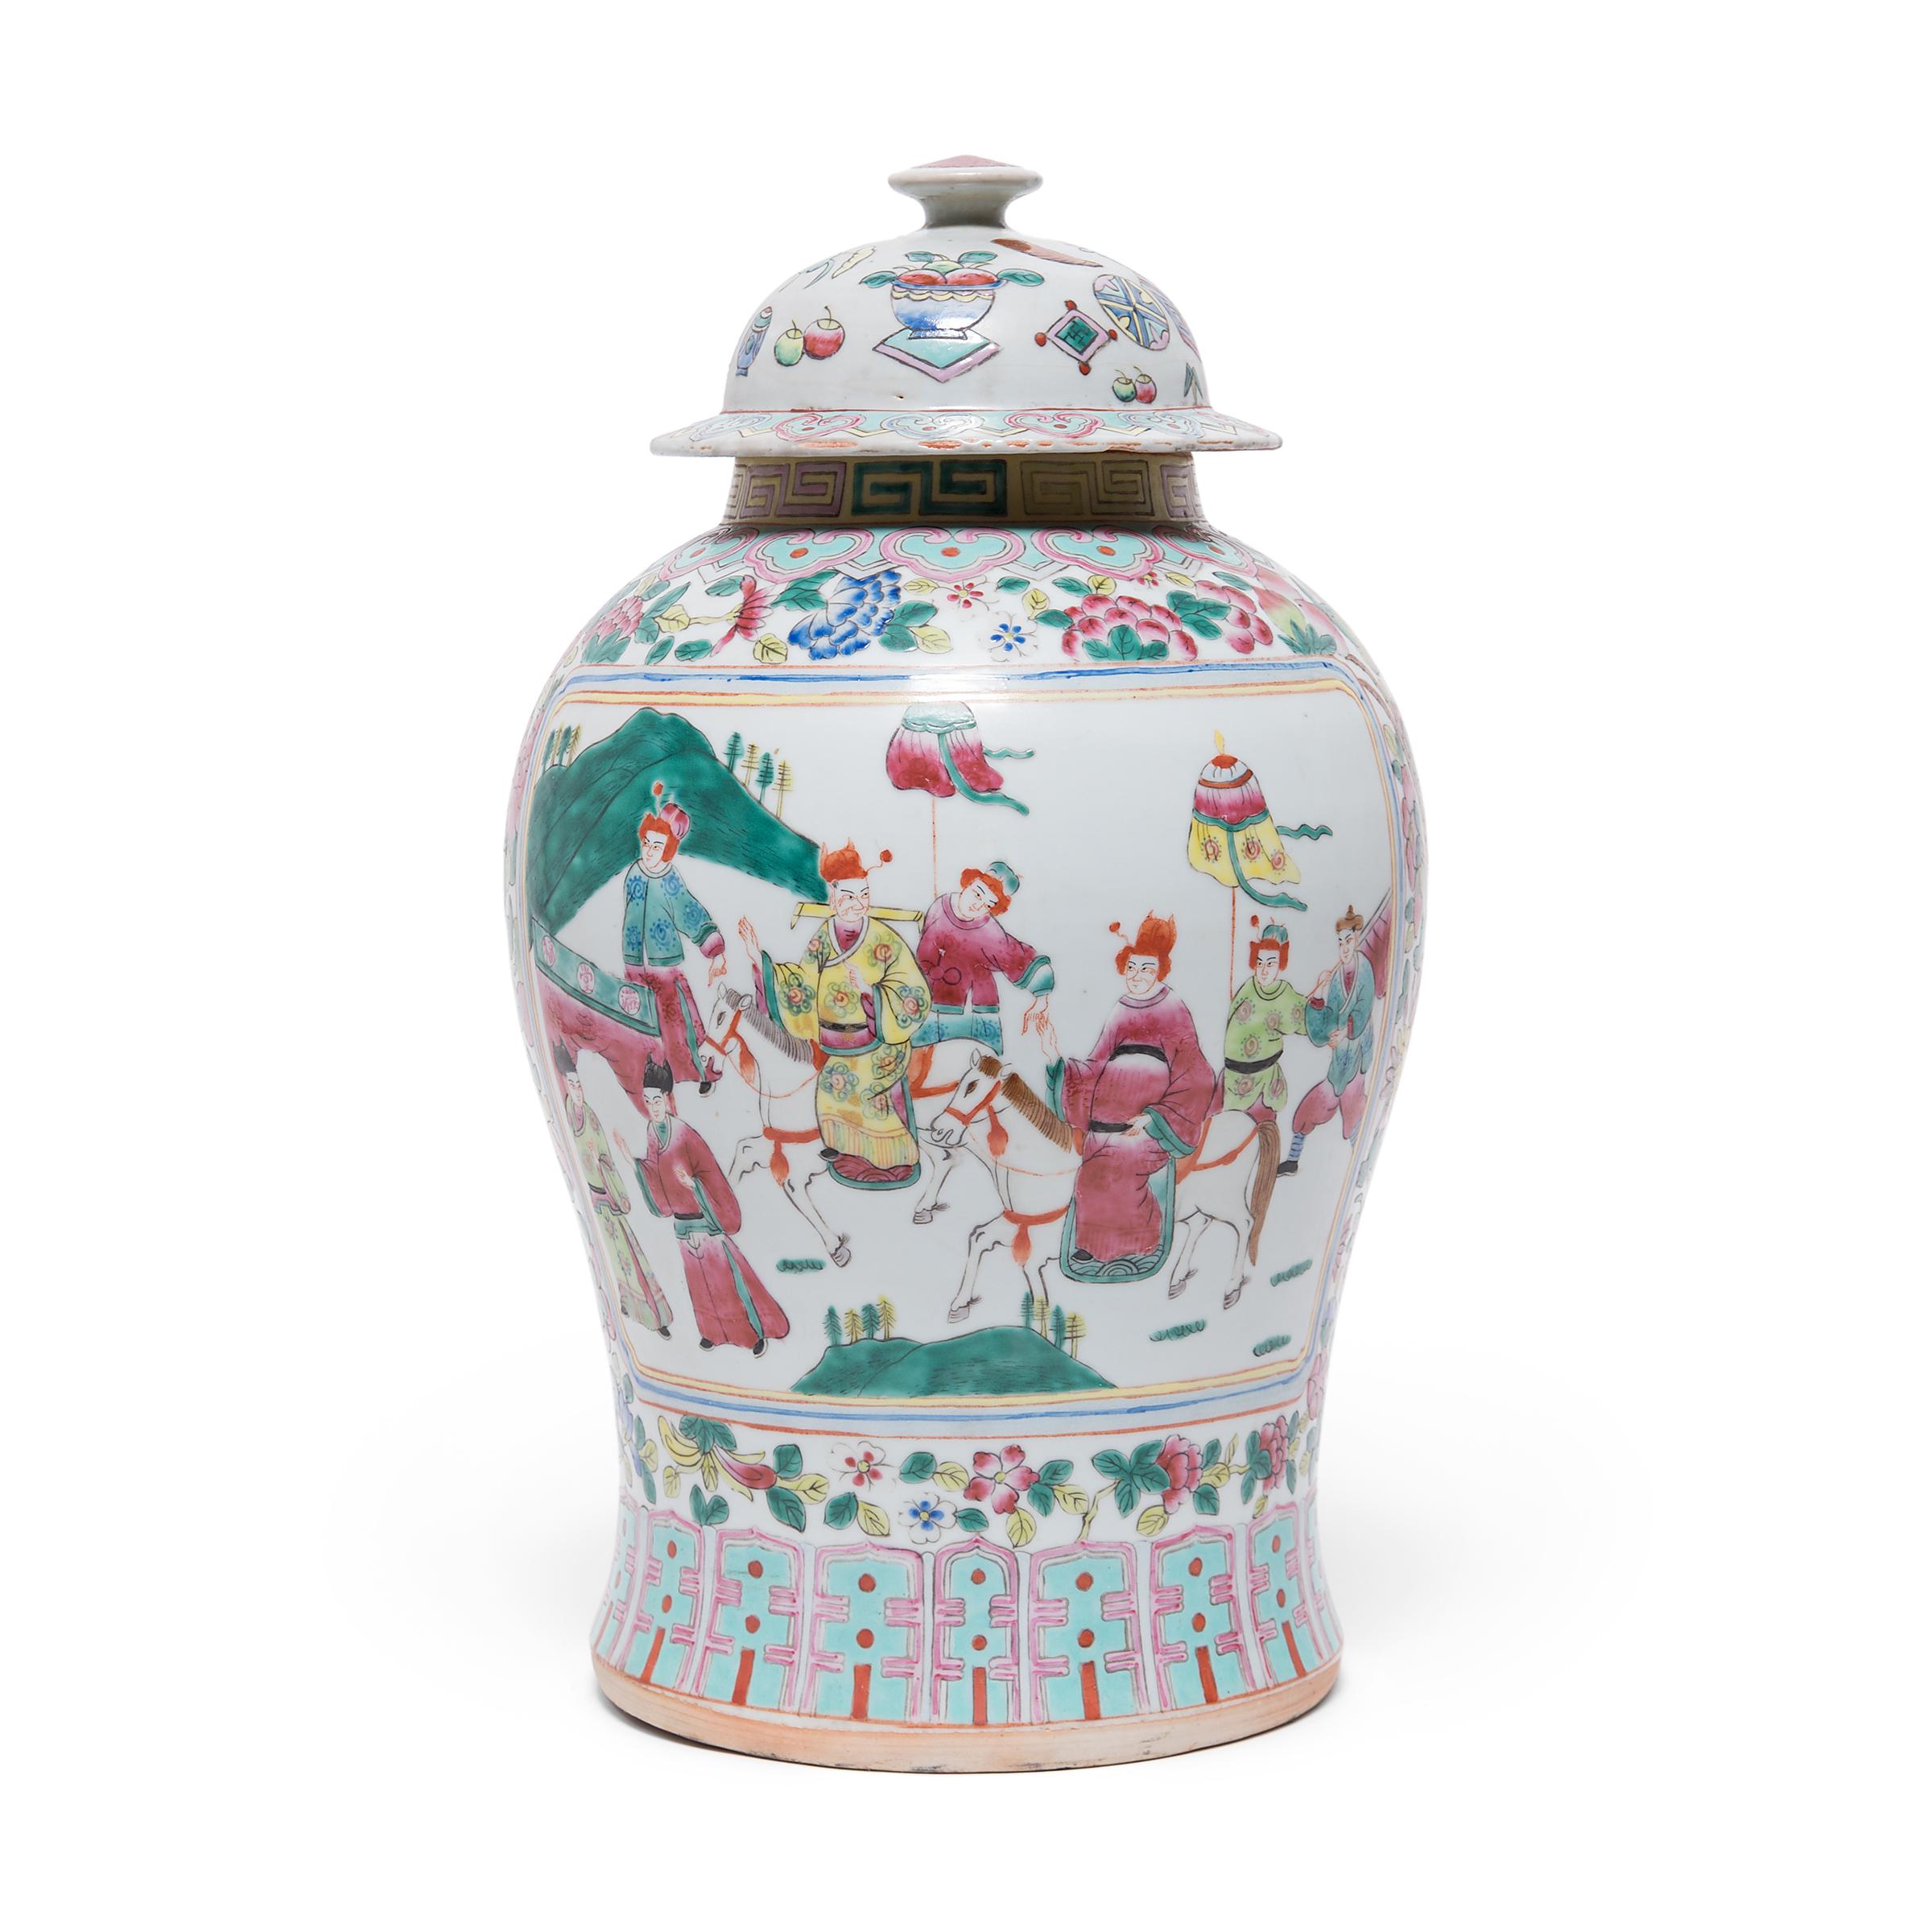 Chinese Export Chinese Famille Rose Scholarly Gathering Baluster Jar, c. 1900